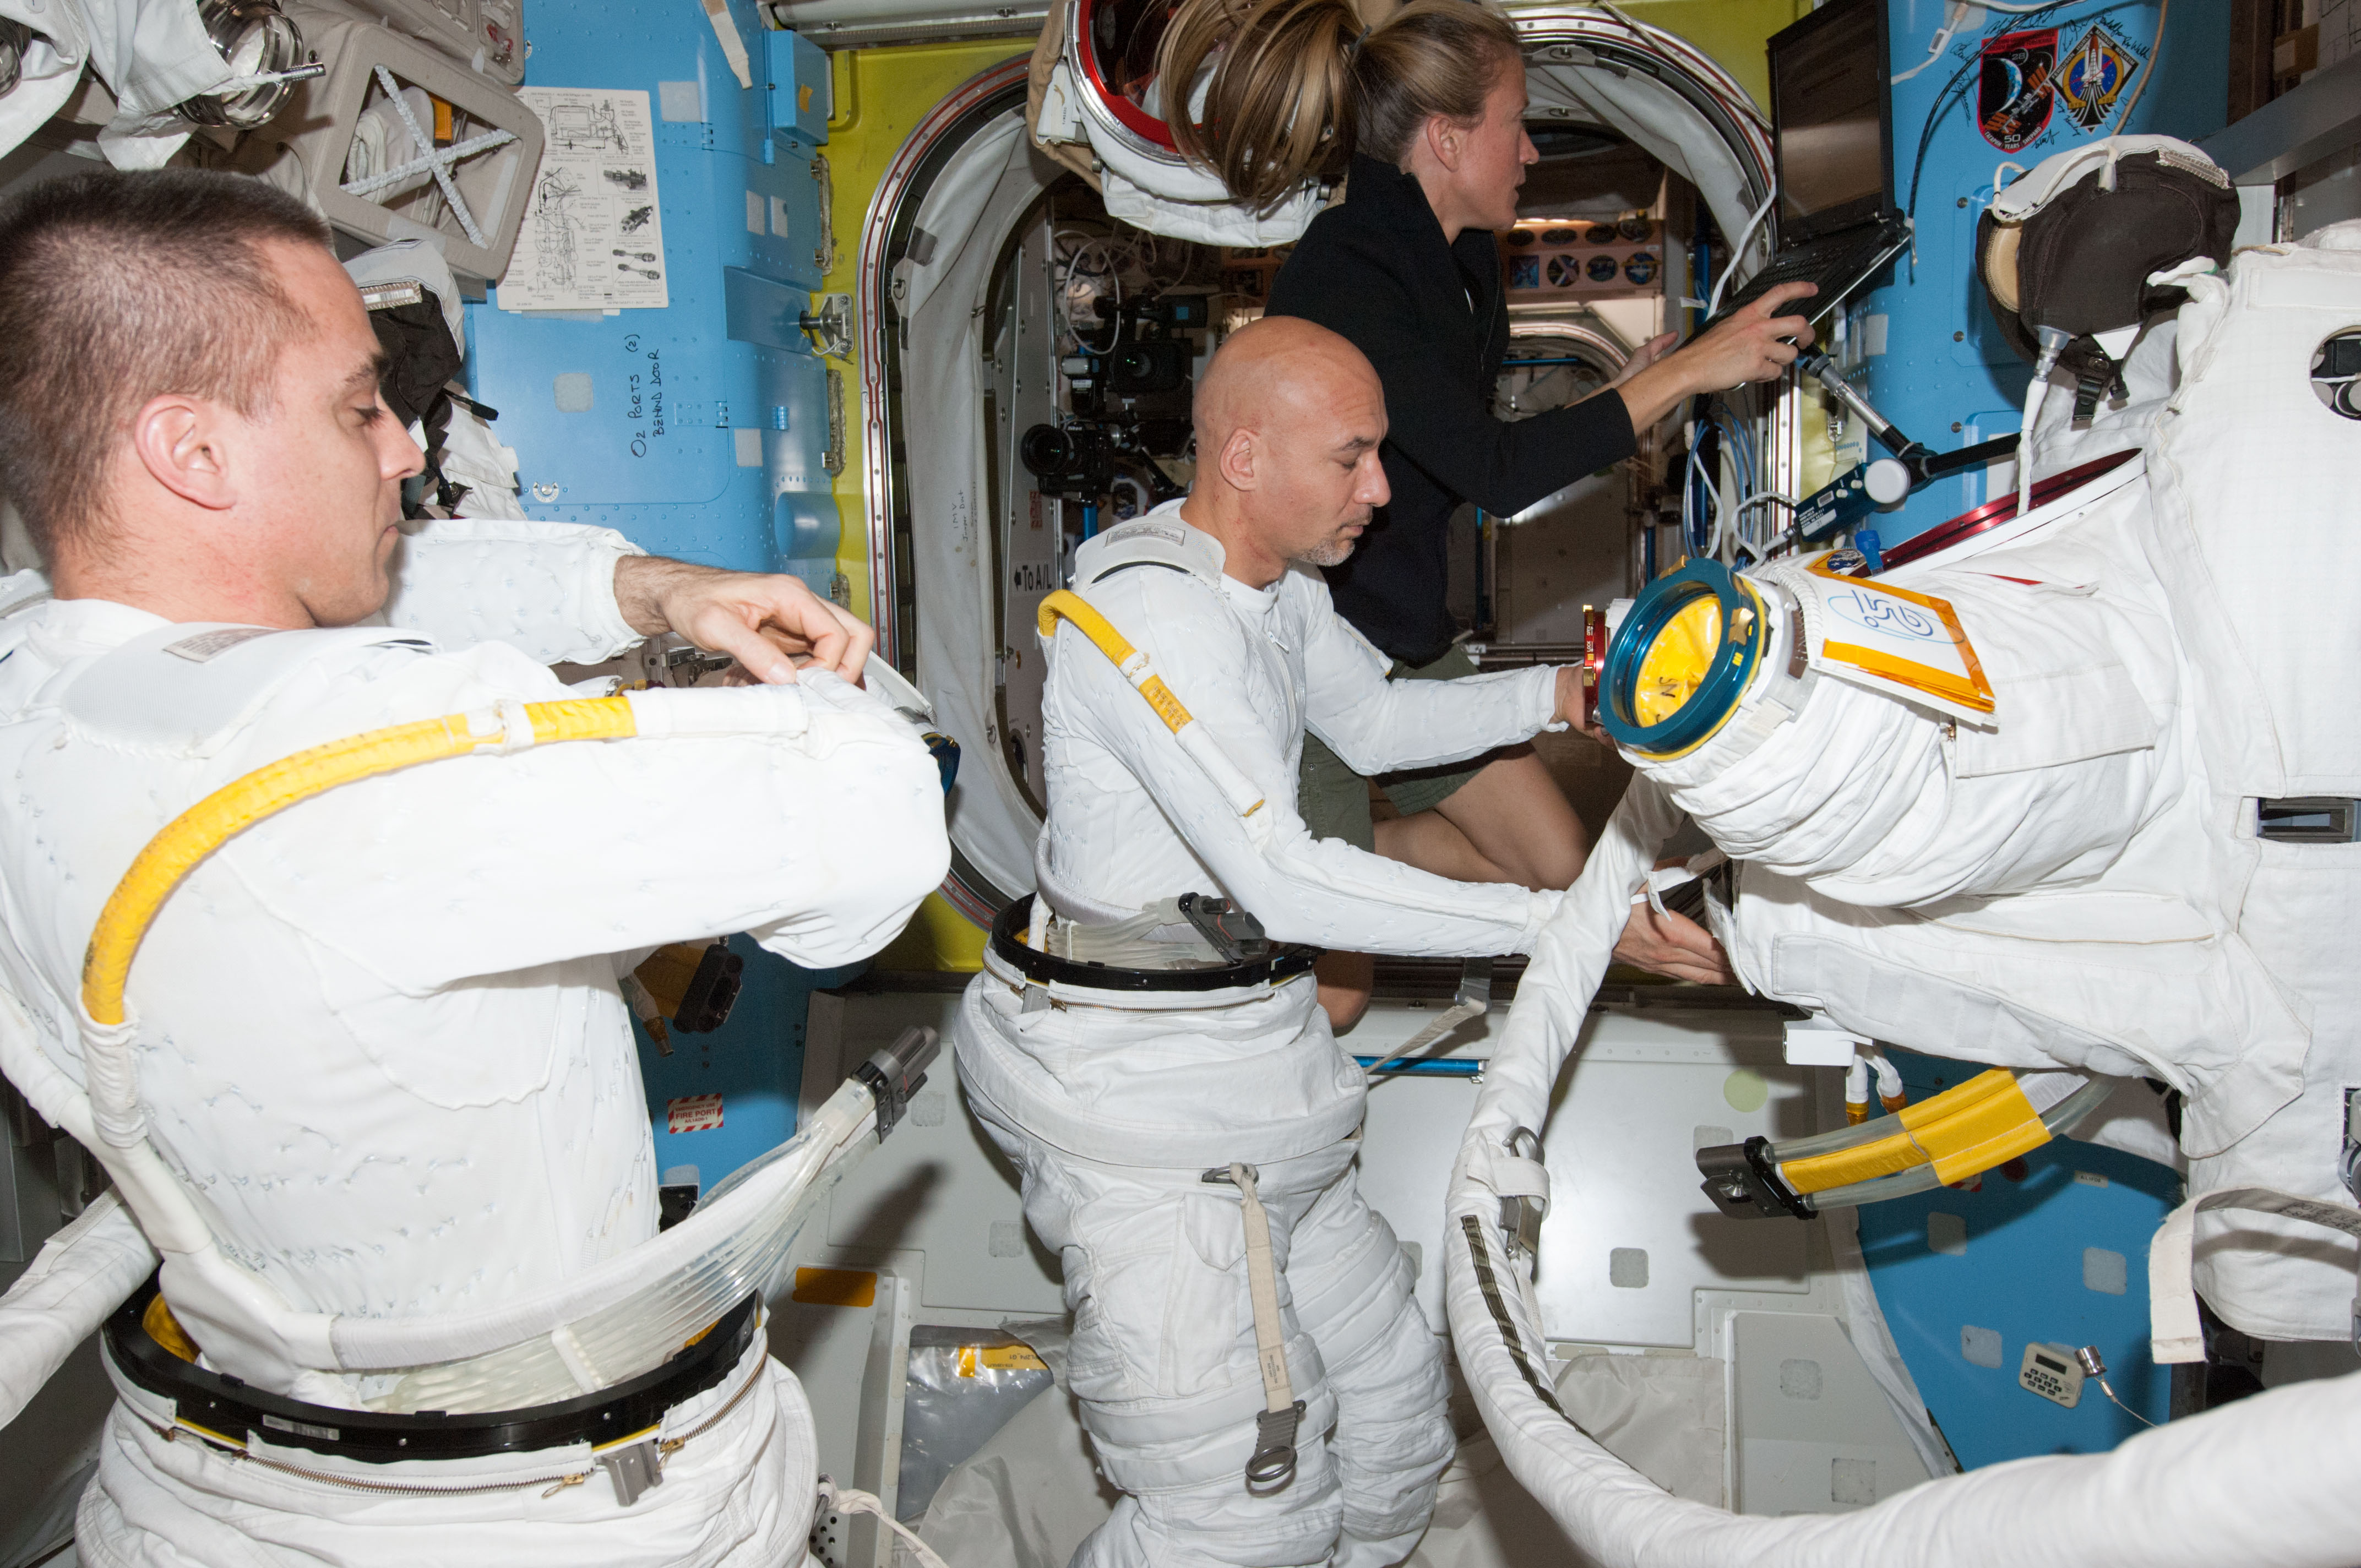 Chris Cassidy (left) and Luca Parmitano check out their suits in the Quest airlock. They will perform a second EVA together on Tuesday 16 July. Photo Credit: NASA